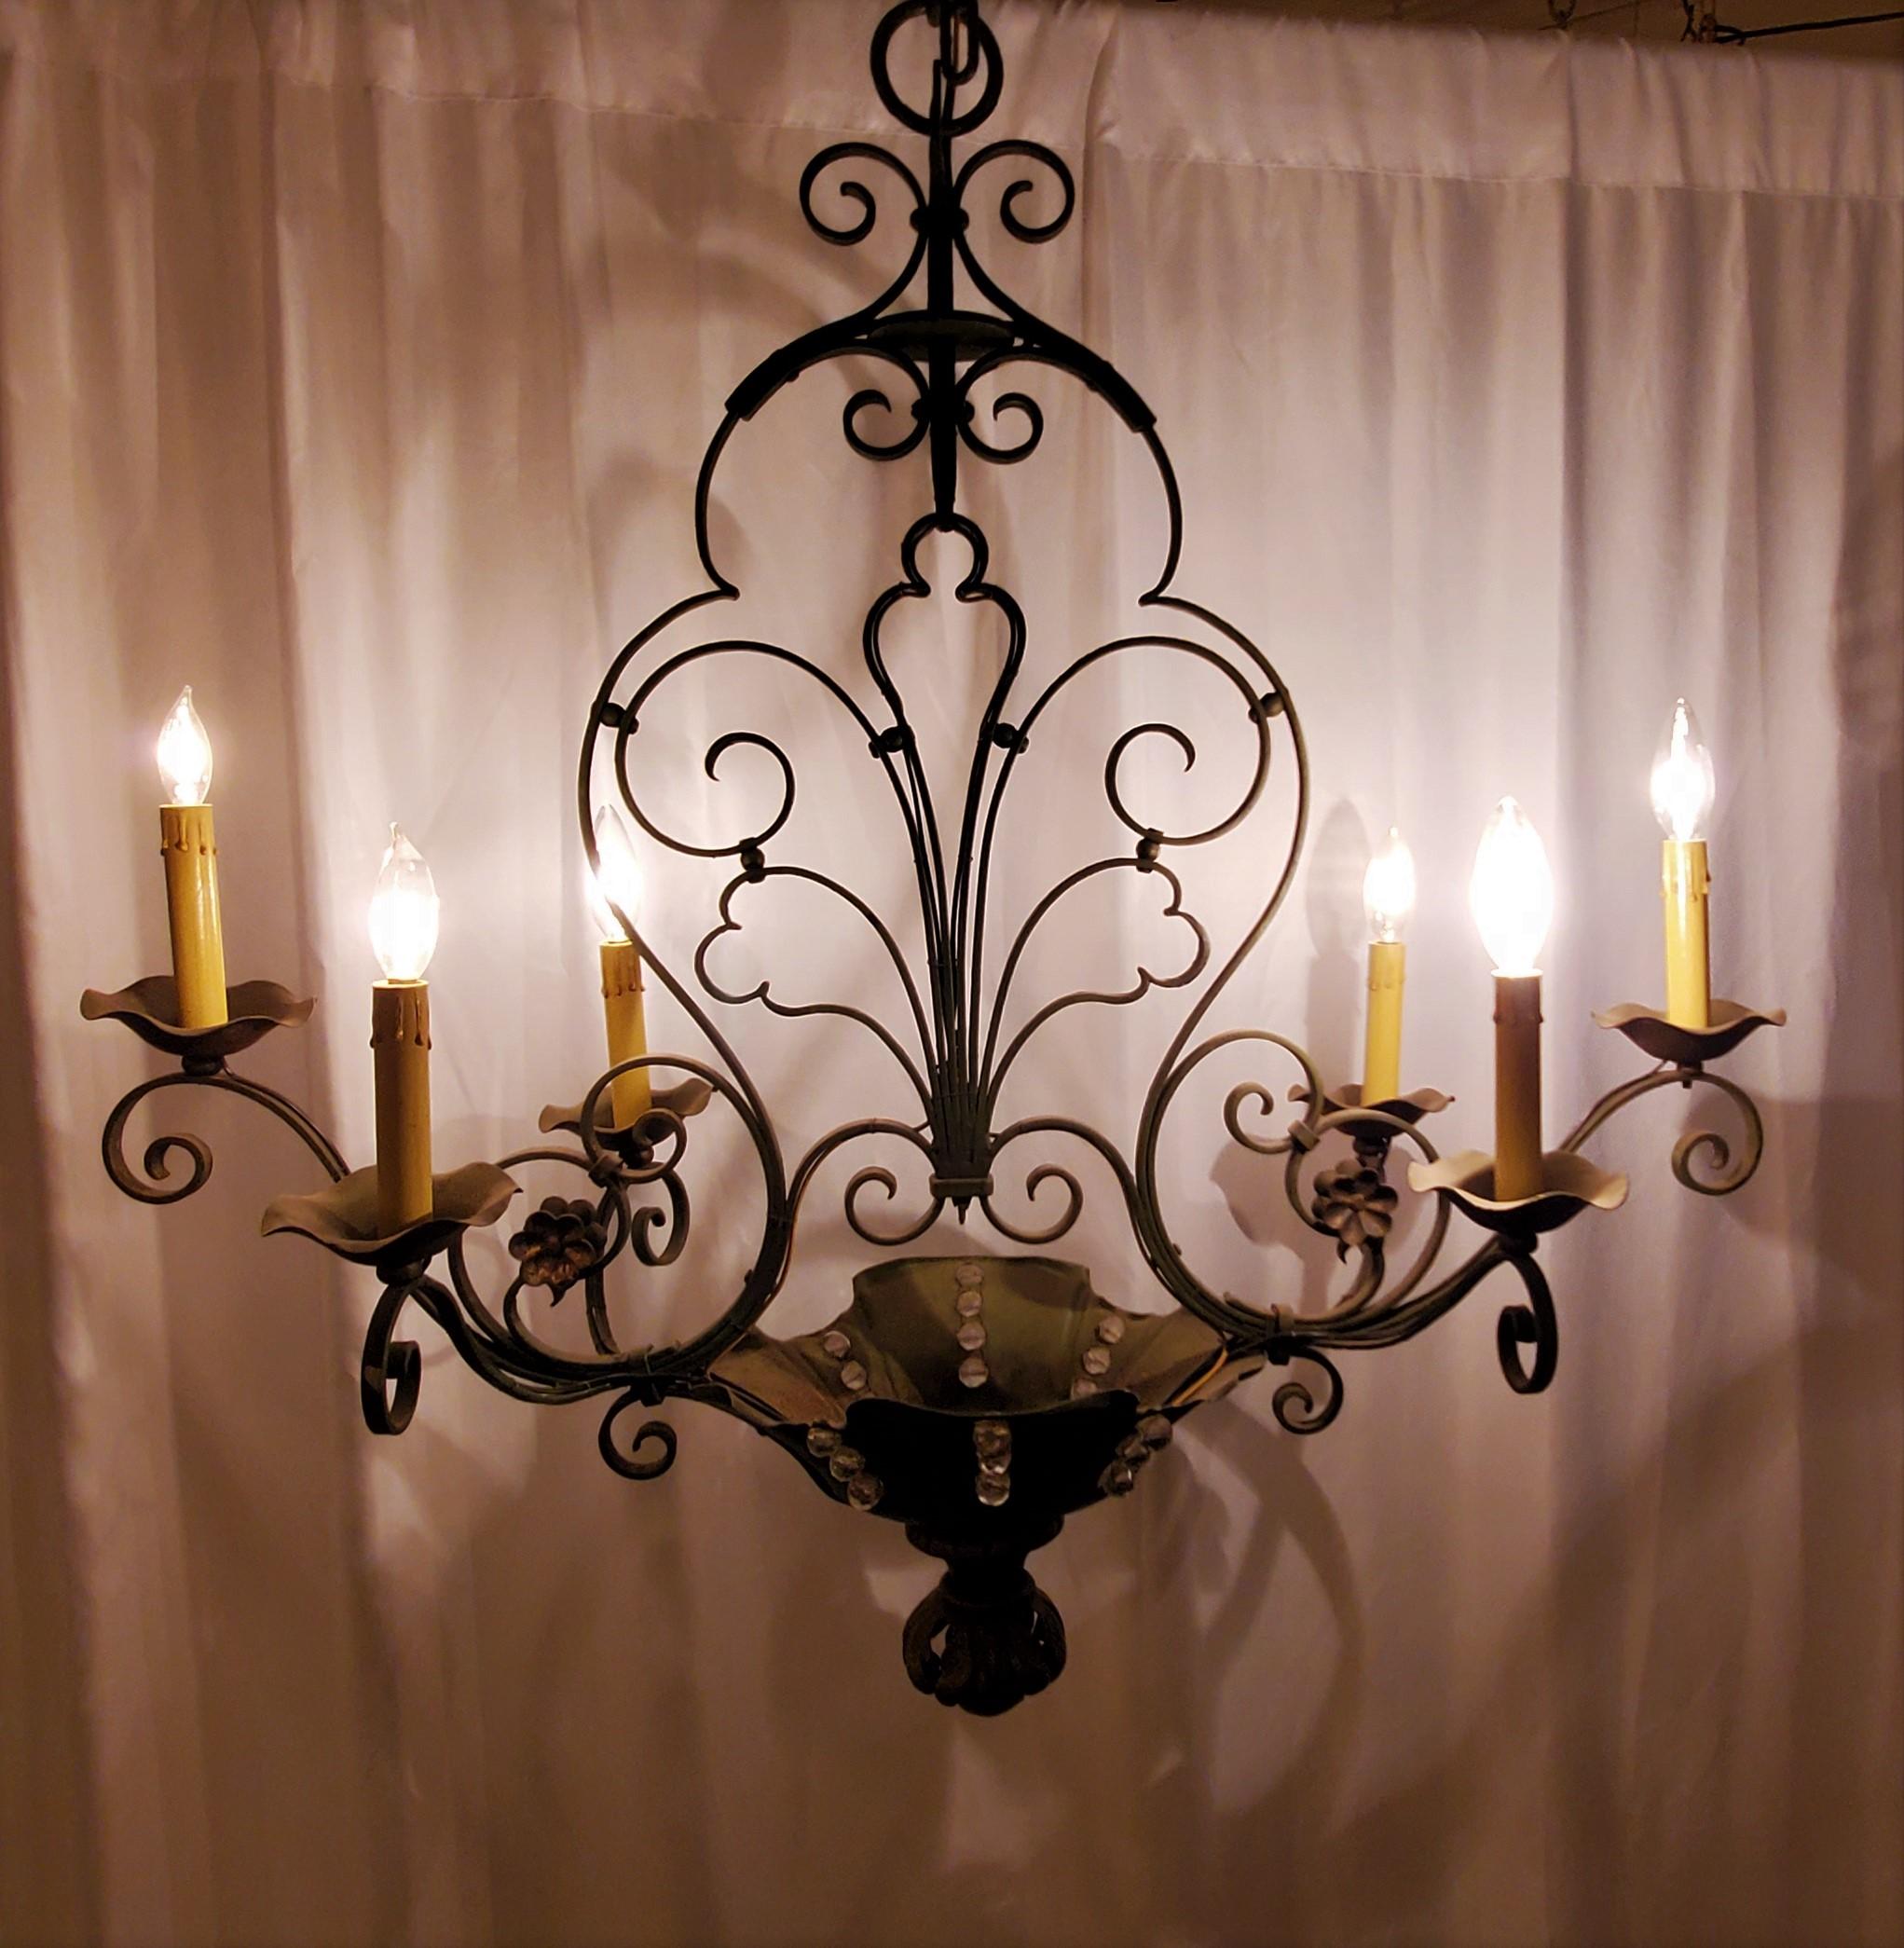 Antique French Wrought Iron Light Fixture In Good Condition For Sale In New Orleans, LA